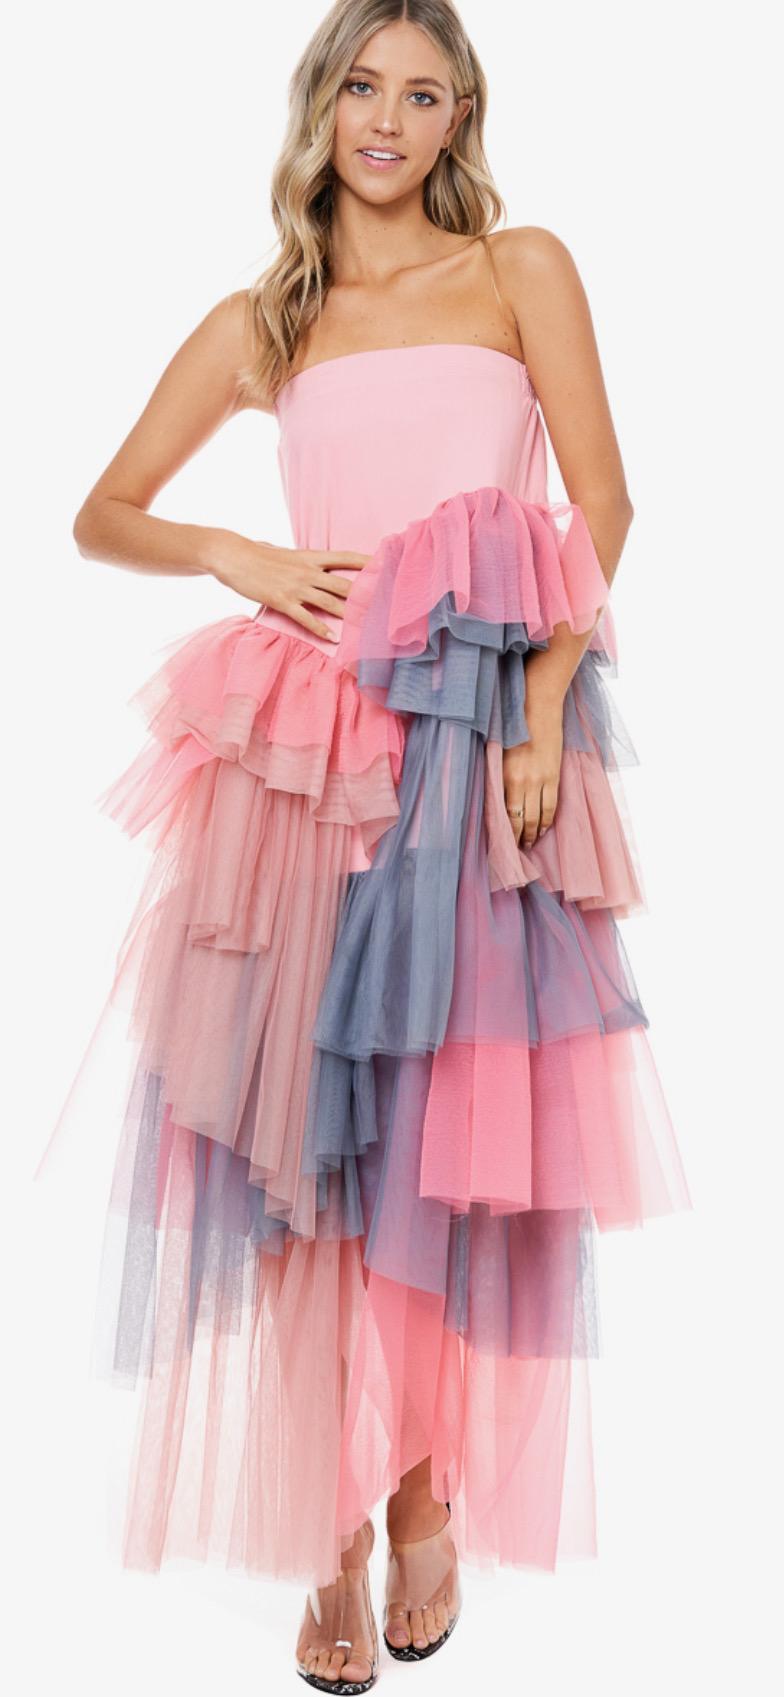 Chel's Tiered Tulle Maxi Skirt